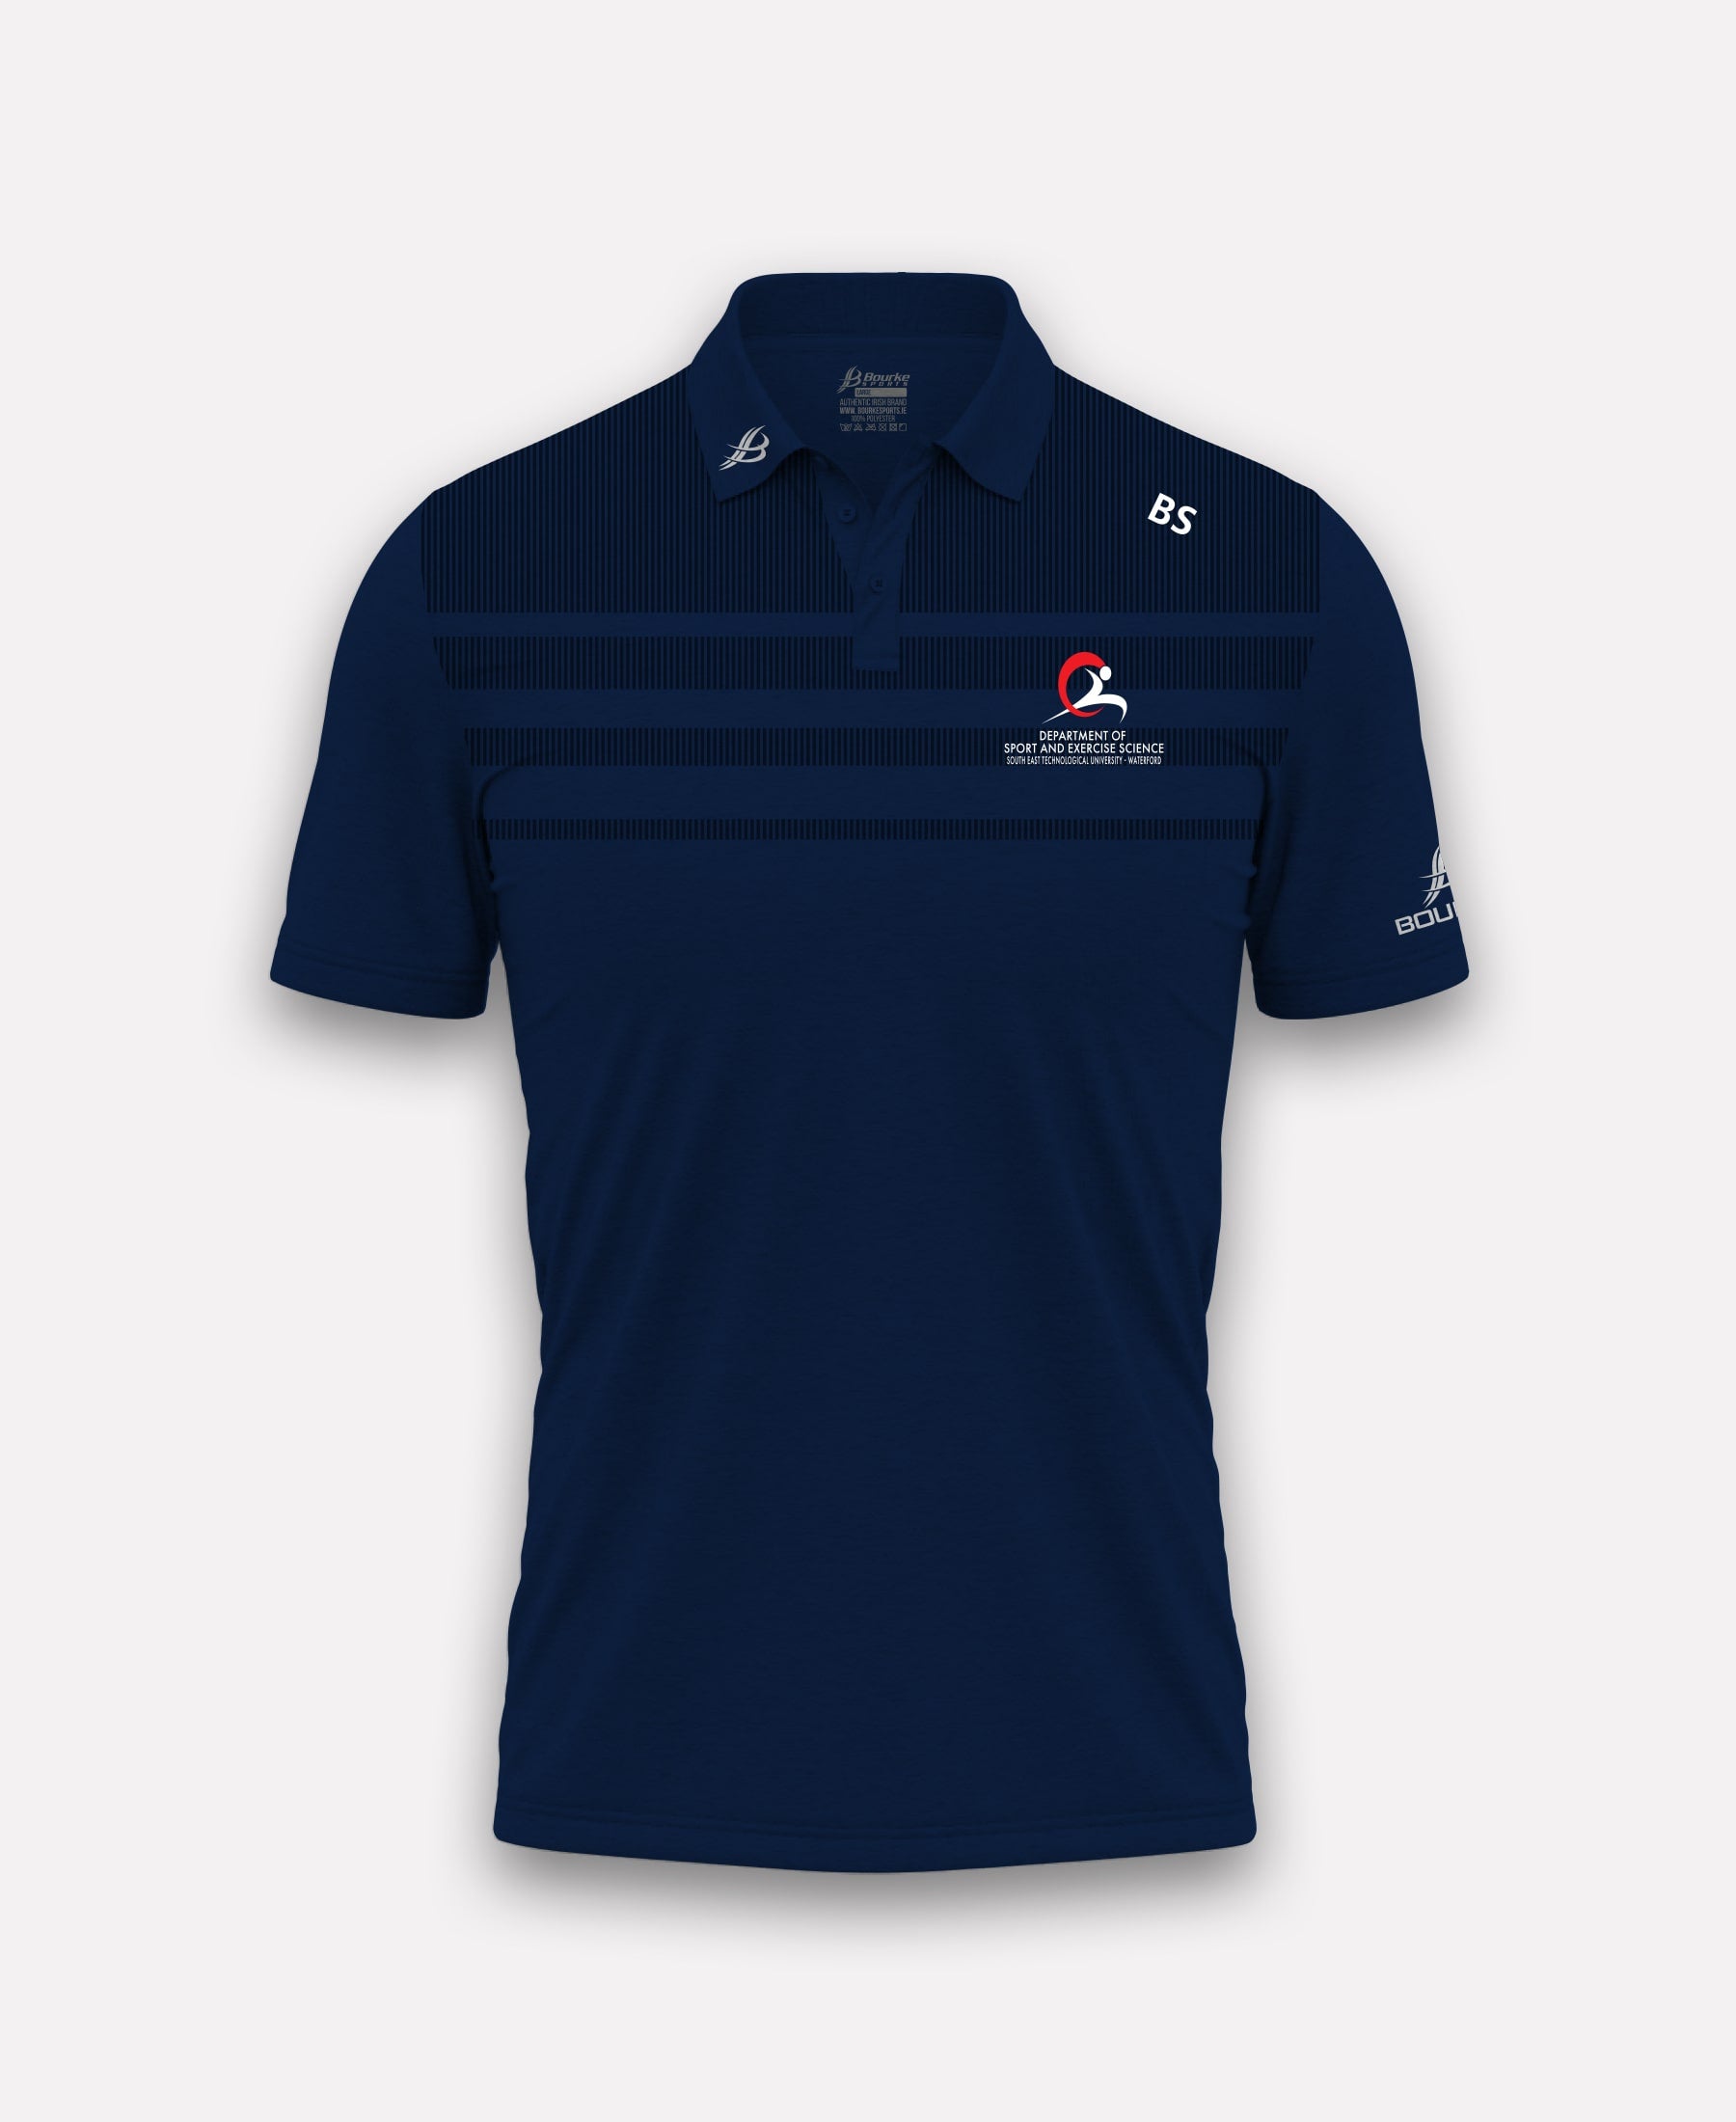 Department of Sport and Exercise Science SETU TACA Polo Shirt (Navy)